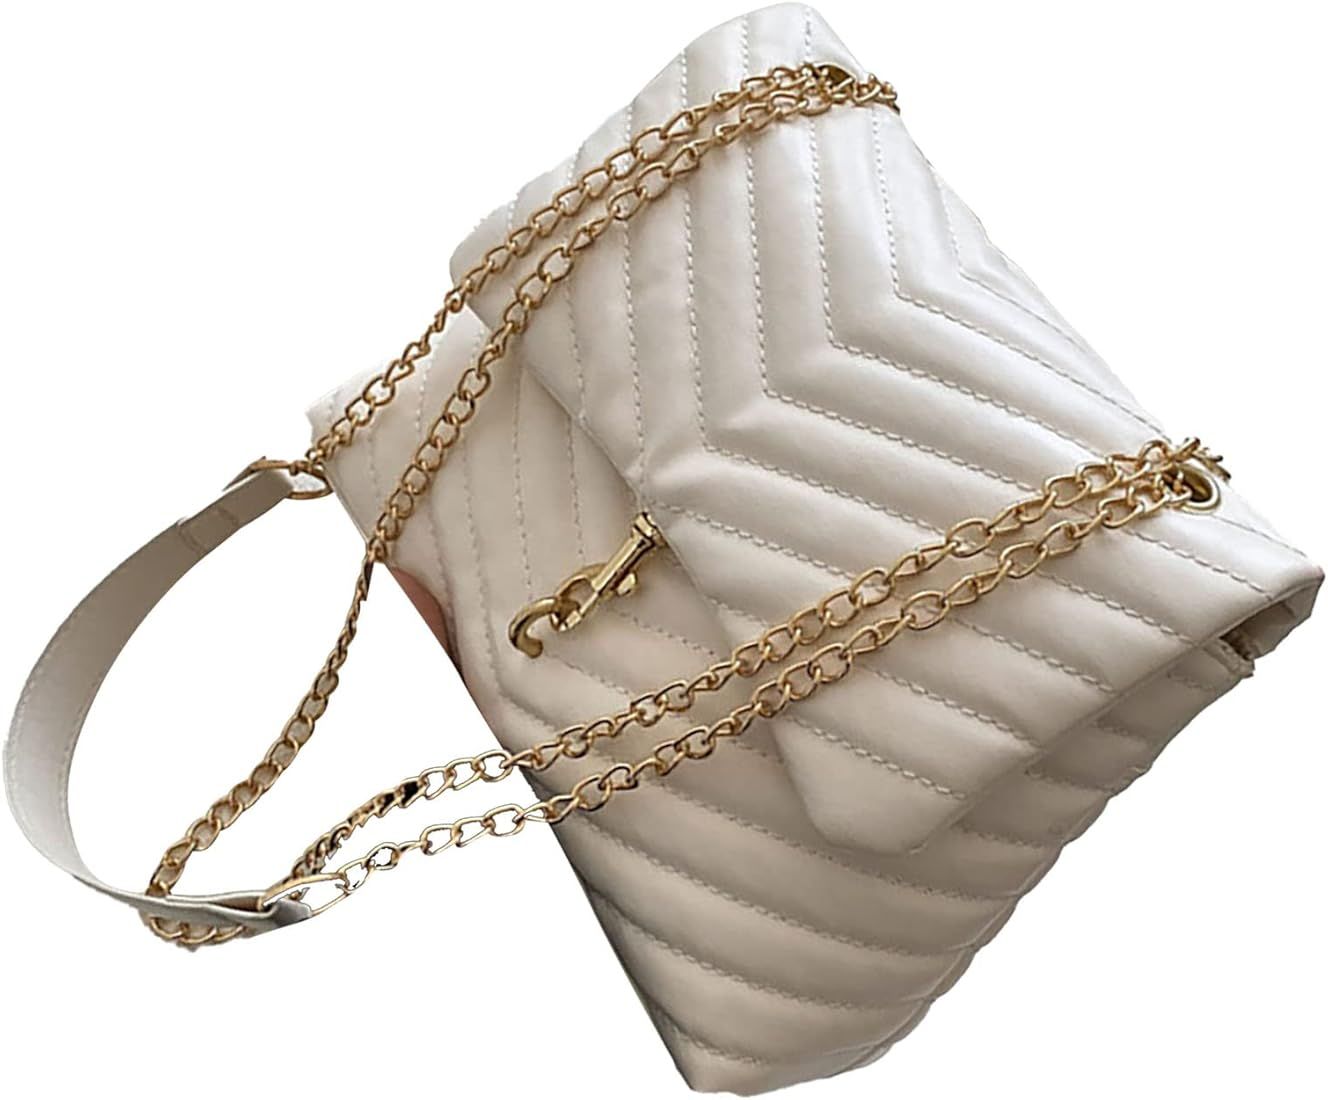 Shoulder Bag with Chain, Handbag with Chain, Fashion Trend for Women | Amazon (US)